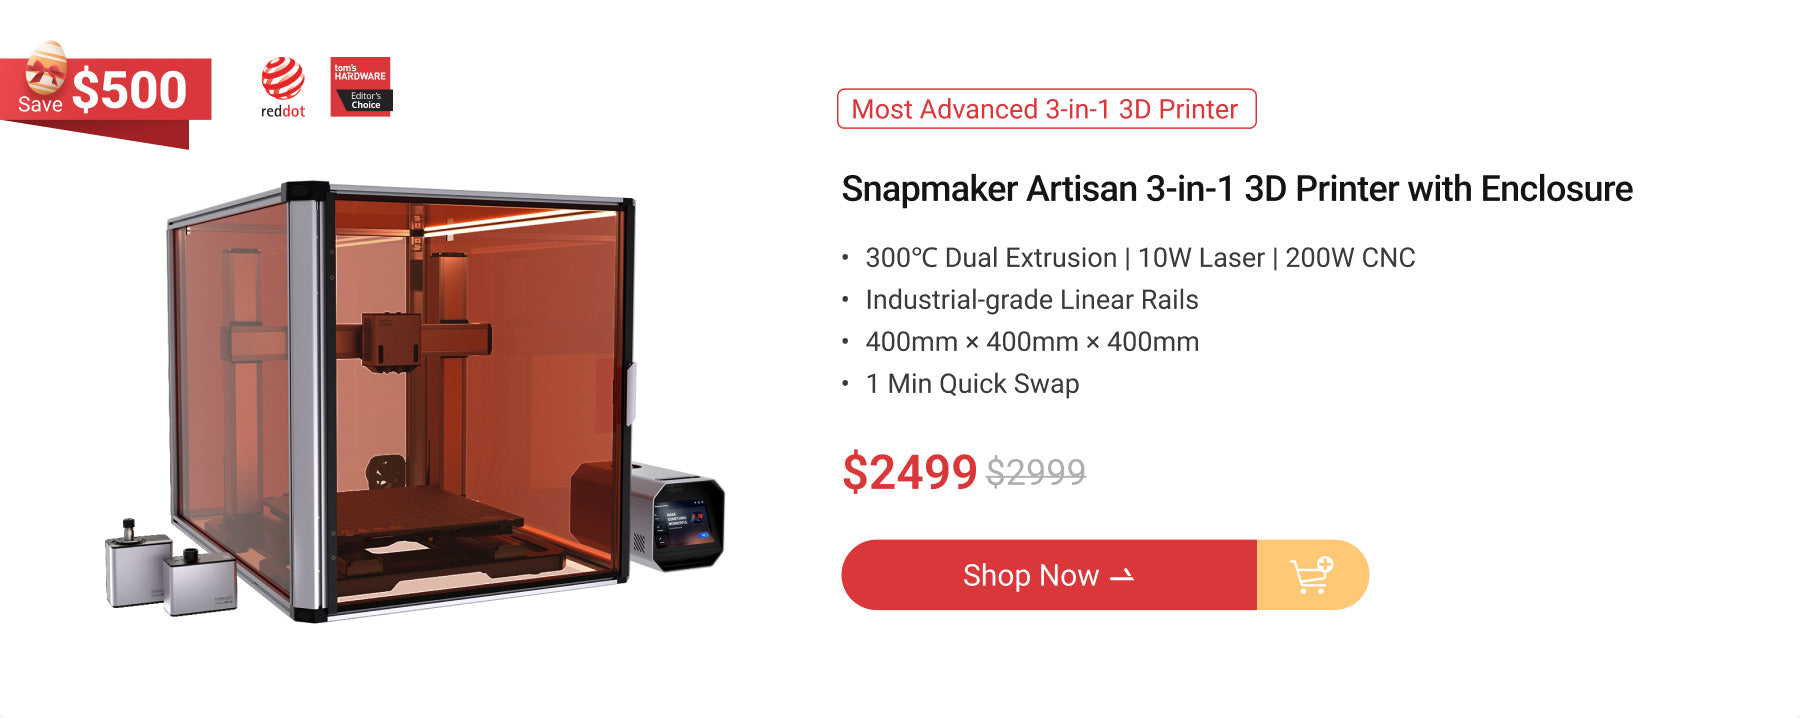 Pc_US_Snapmaker-Artisan-3-in-1-3D-Printer-with-Enclosure.jpg__PID:a1c85a55-8686-4c6f-937b-8059bffa3f9b